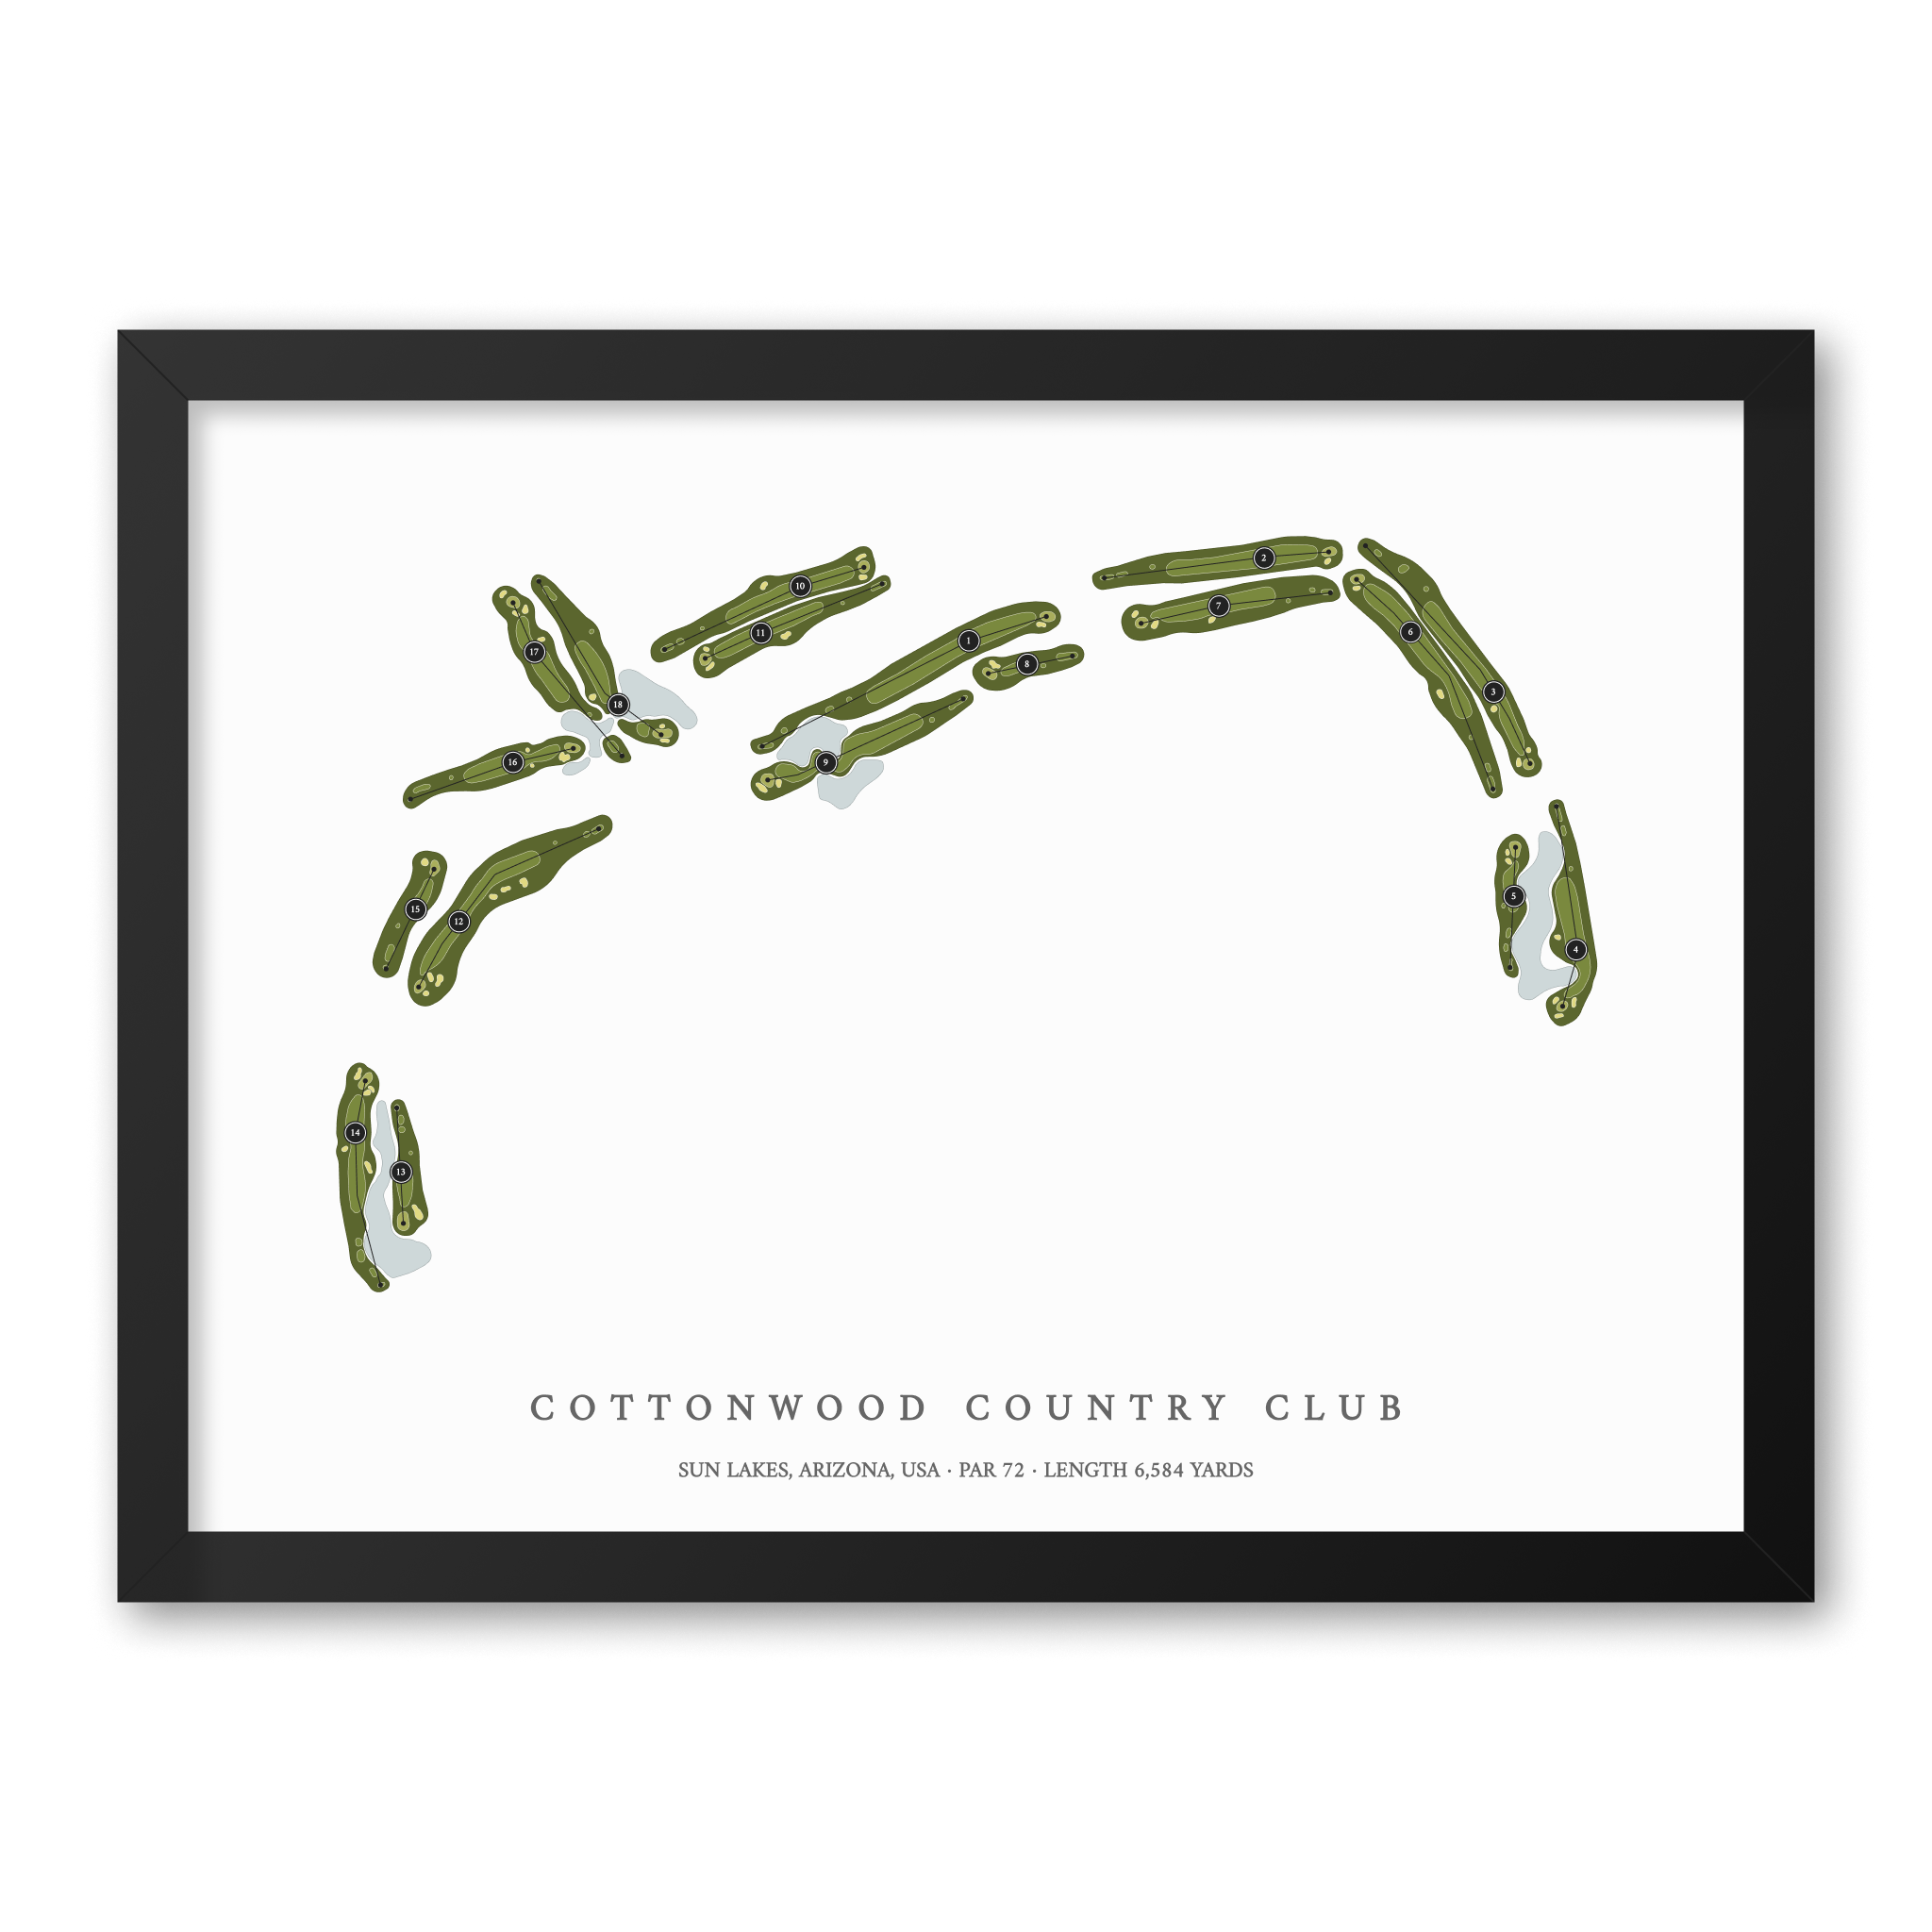 Cottonwood Country Club | Golf Course Map | Black Frame